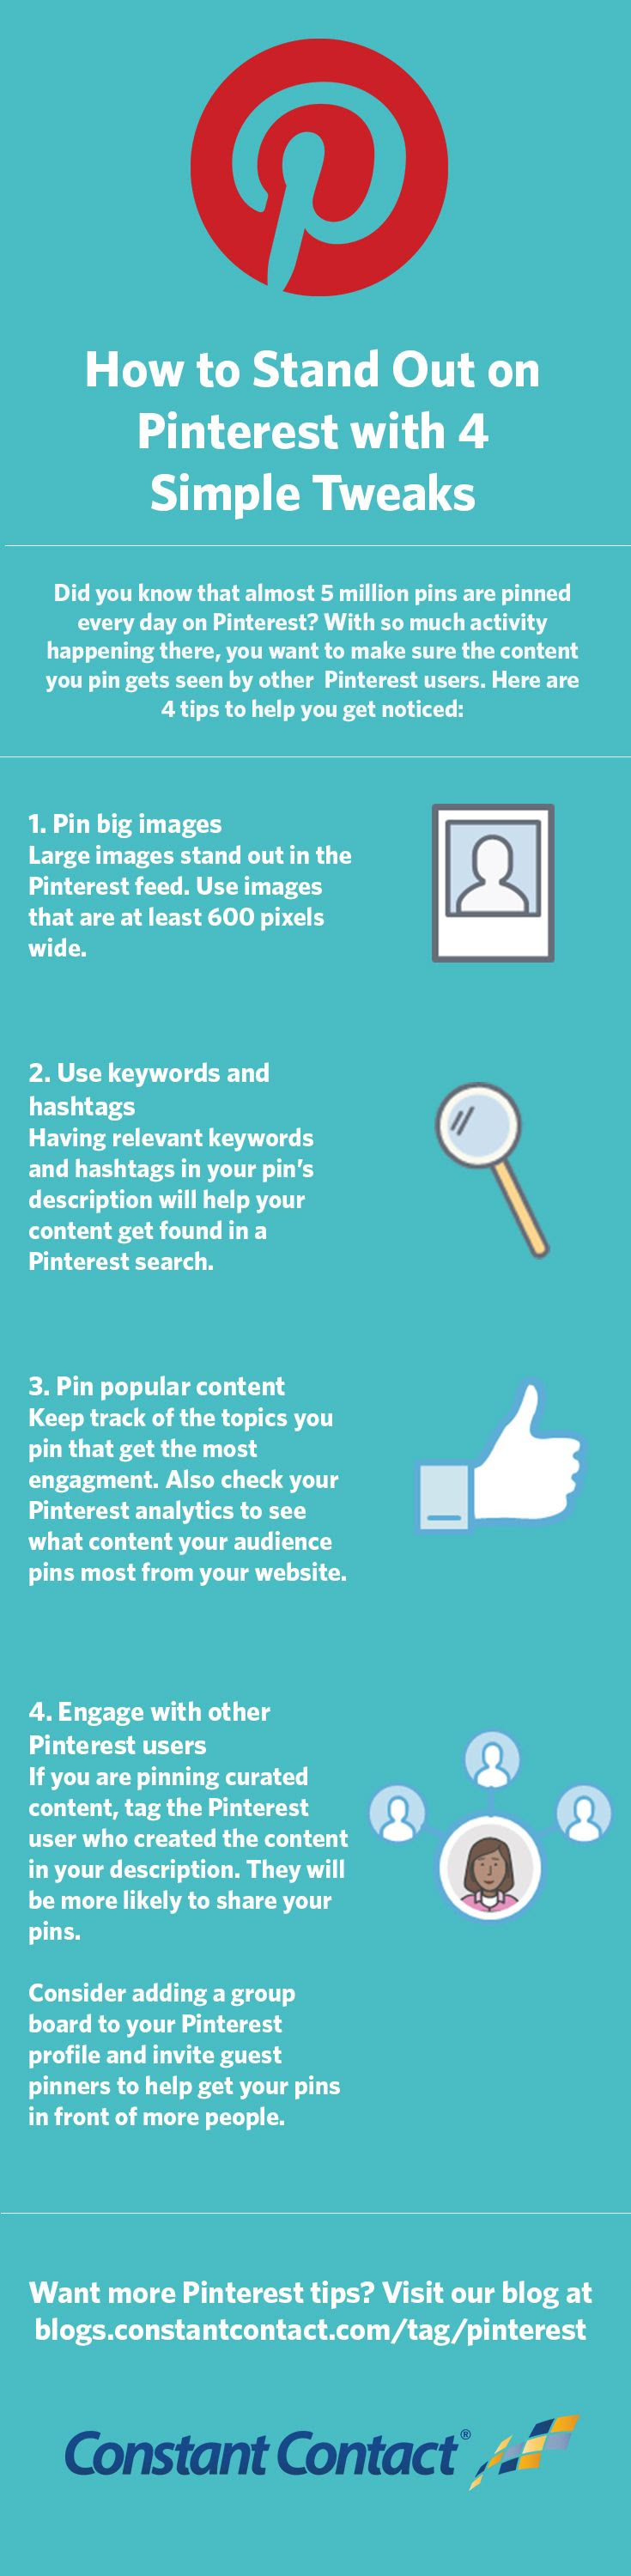 If you’re a Pinterest user, you know that pinning on Pinterest happens fast and furiously. How do you make your content stand out and get noticed? Here are 4 simple tweaks